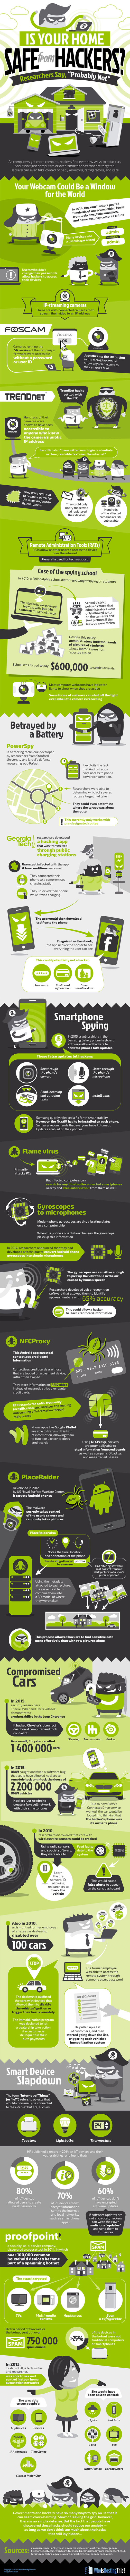 Best Way to Secure Home Network from Hackers Infographic